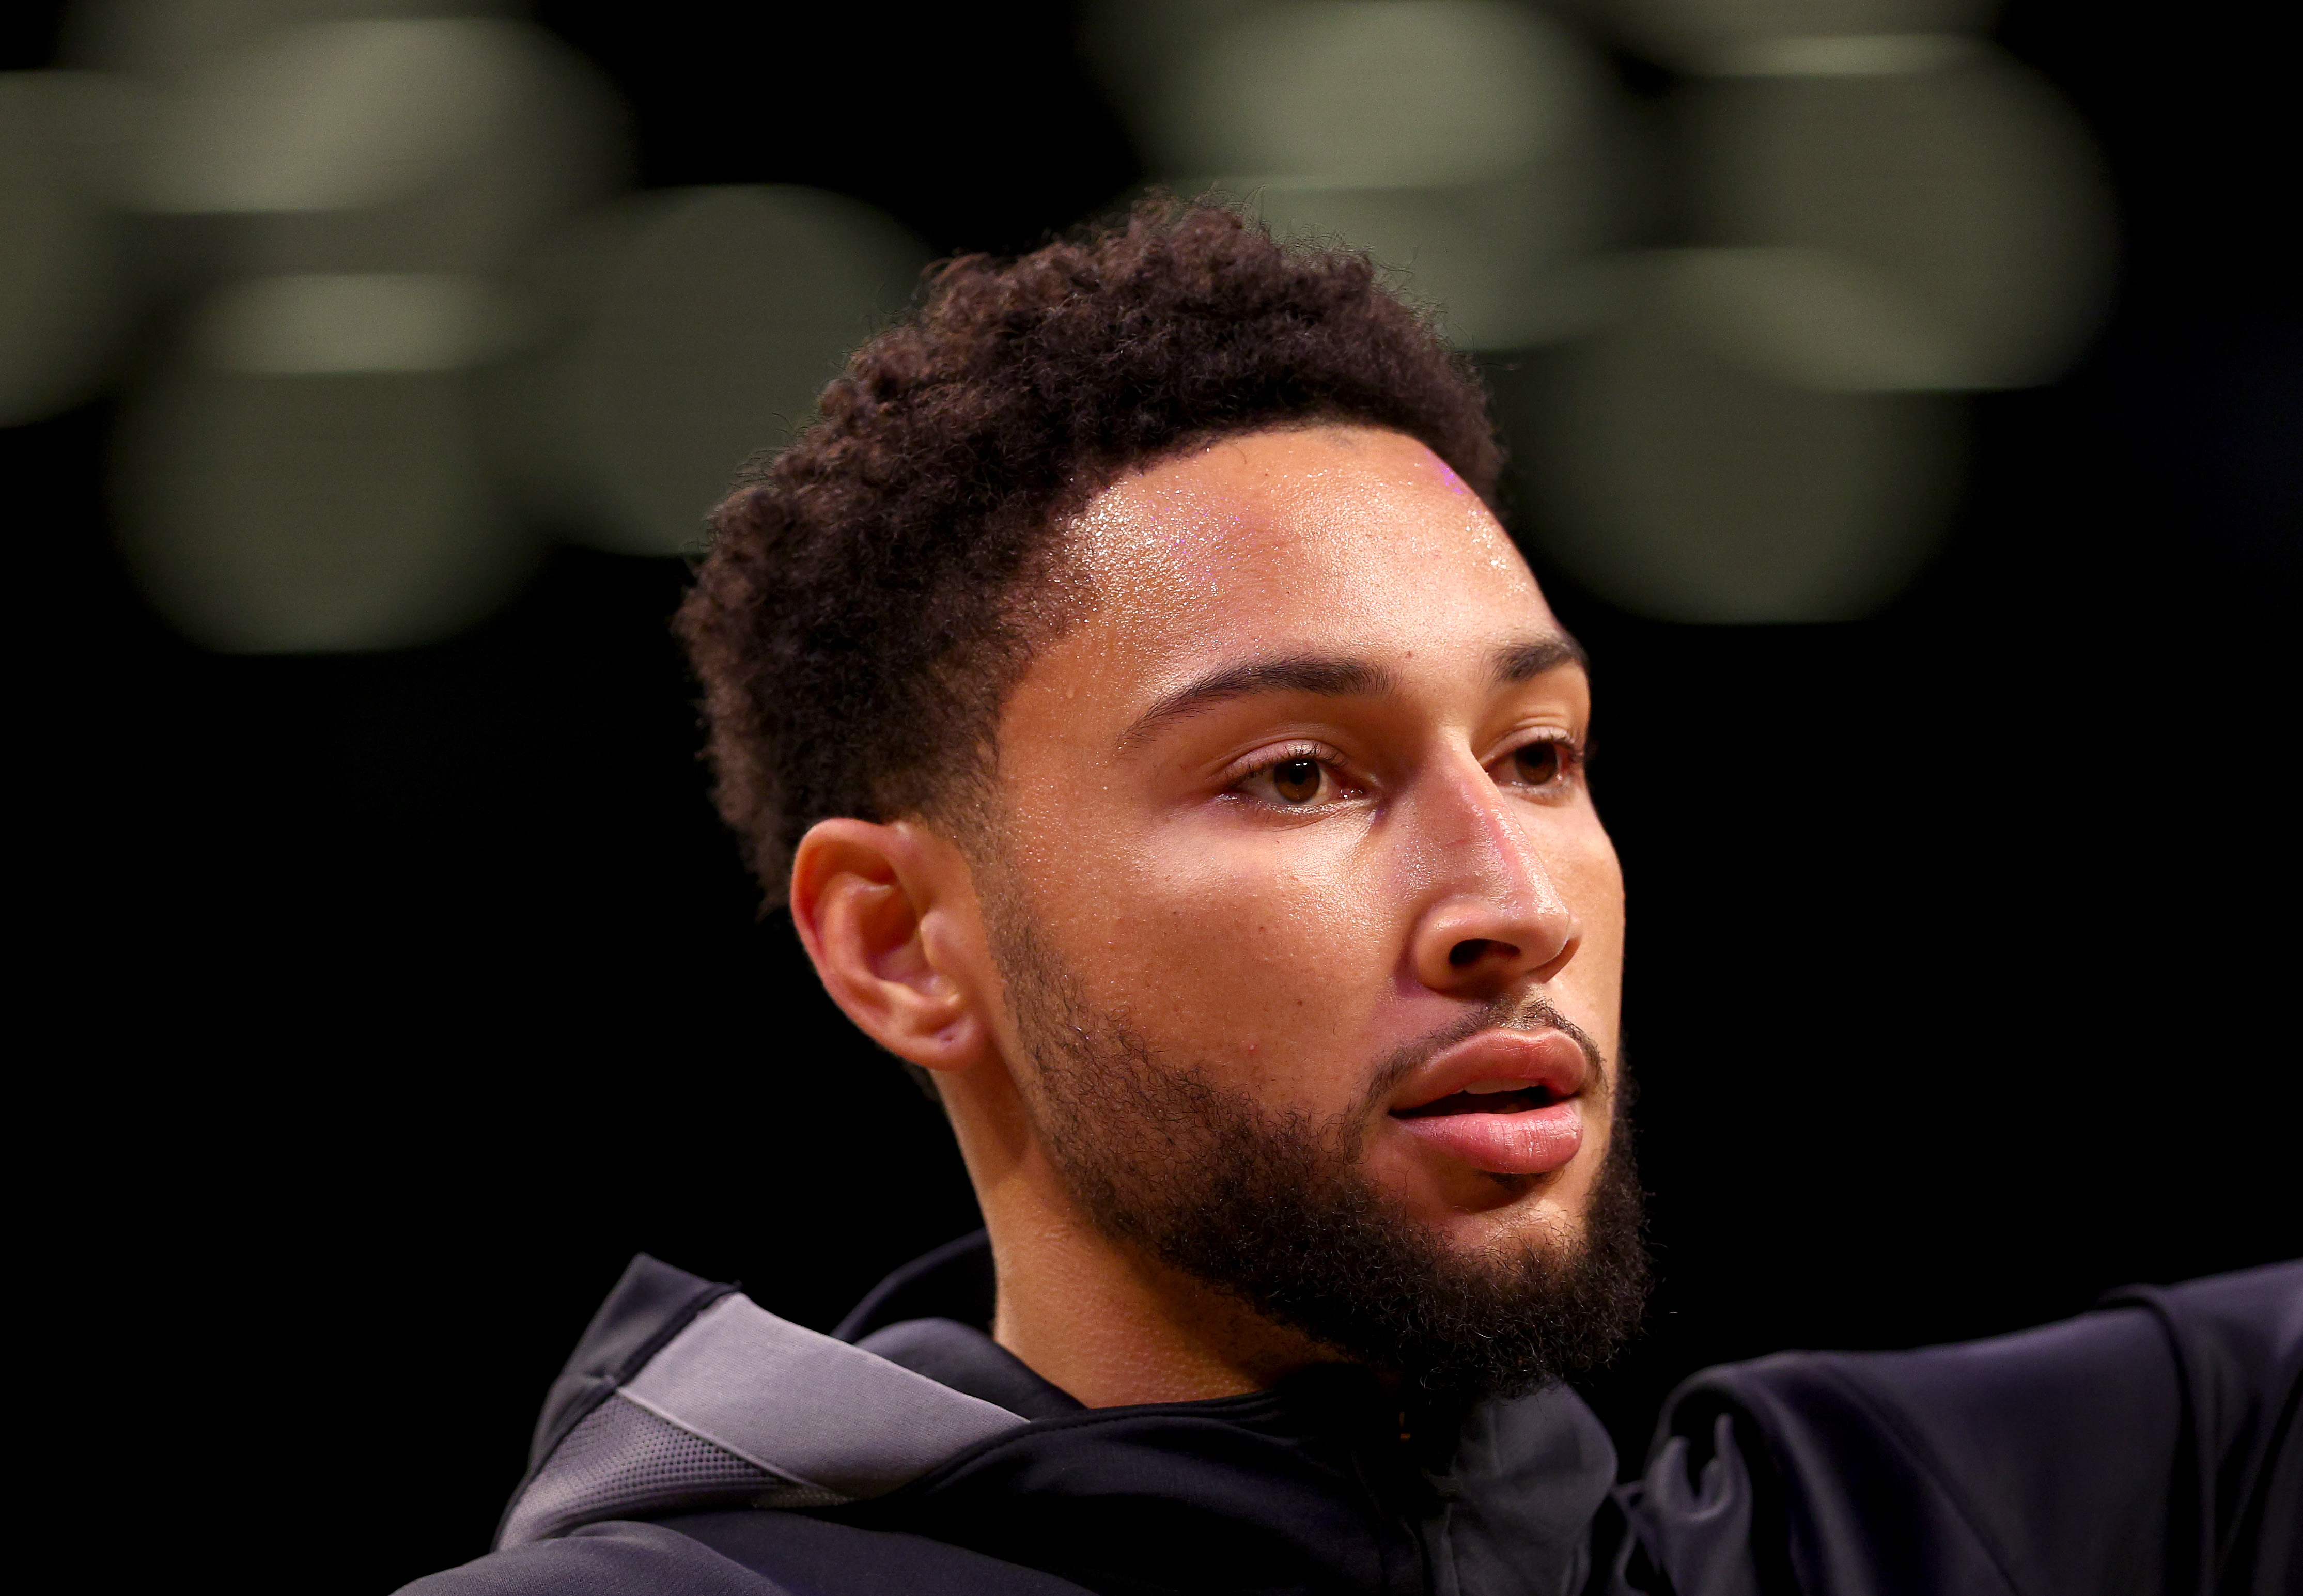 Ben Simmons Roasted After Saying He Plans to 'Dominate' This Season